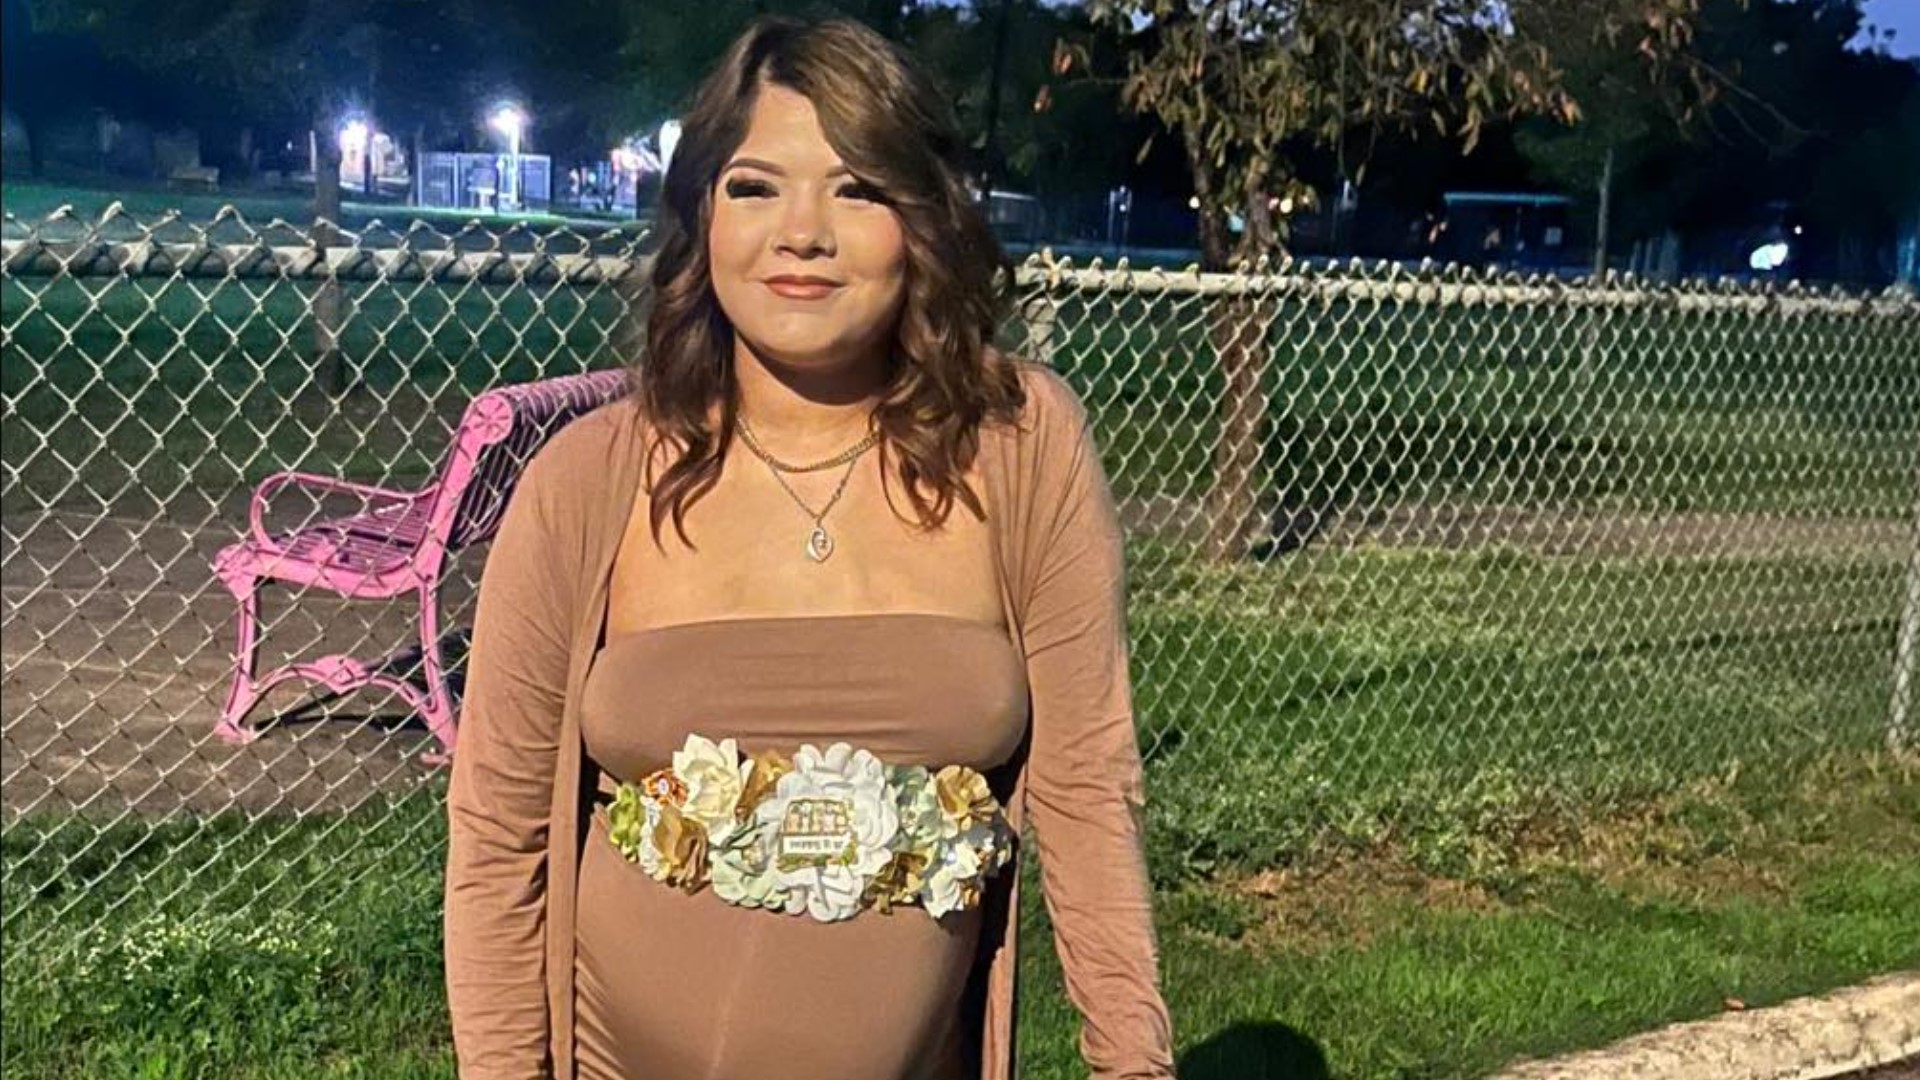 Gloria Cordova said her daughter, Savanah Nicole Soto, was a week past her due date but never showed up at the hospital Saturday to begin labor.